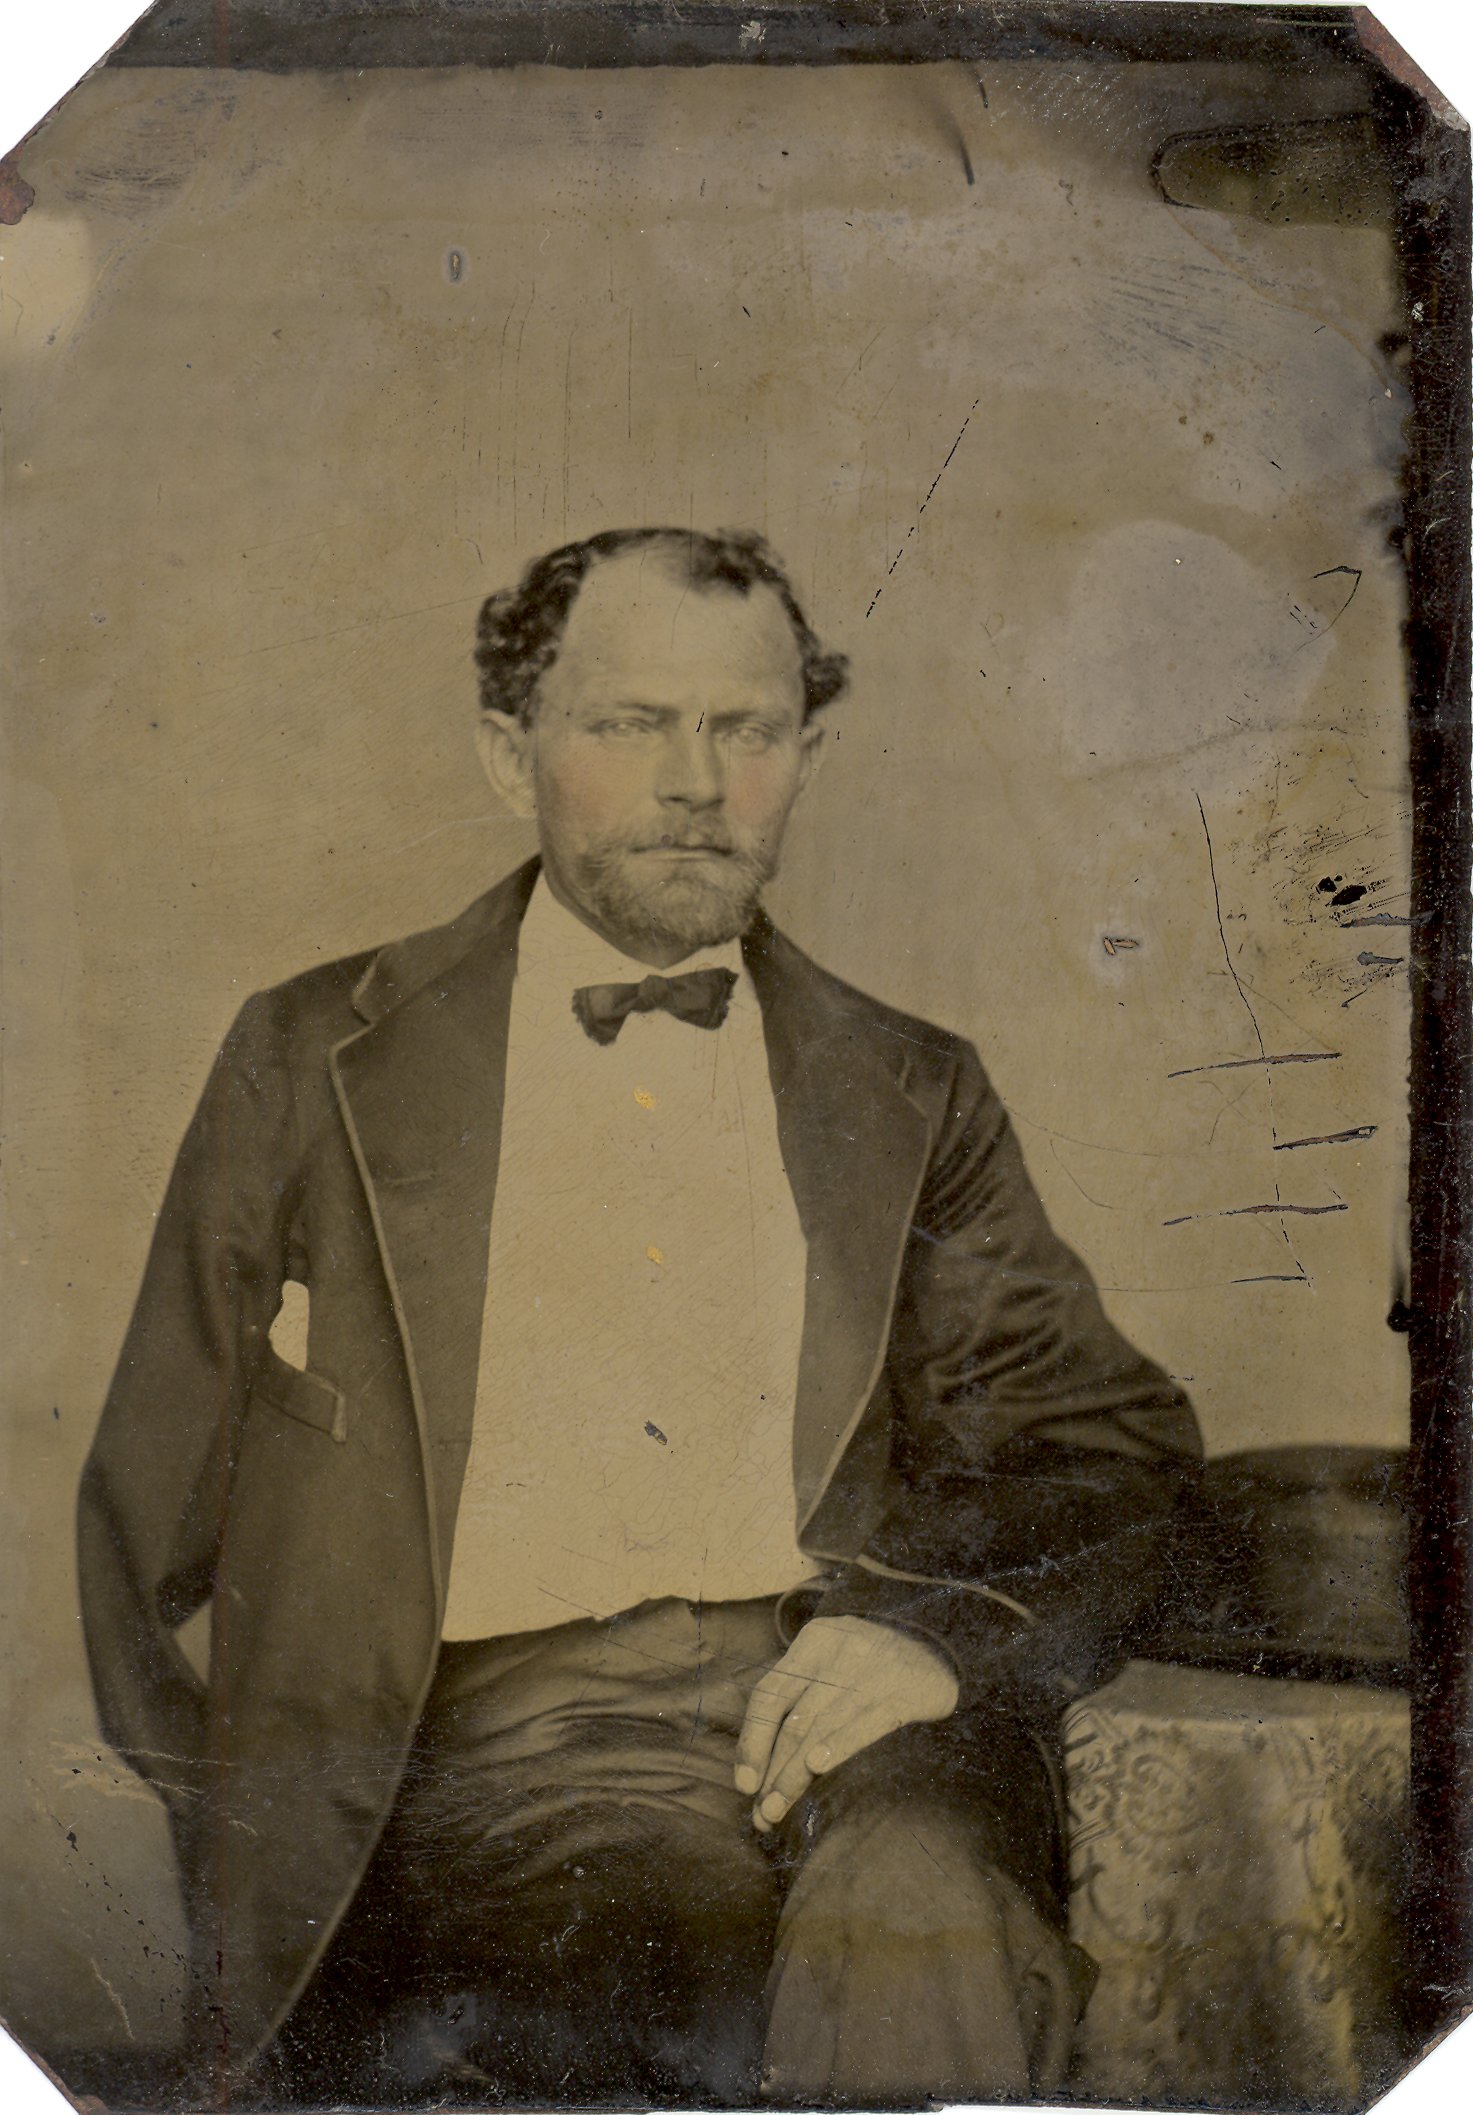 From the collection of Matthew Gallienne.
I assume this is a relative from his wife's side. Ruby Love Andrews of Society Hill, Alabama. The gentleman probably lost his arm in the civil war.